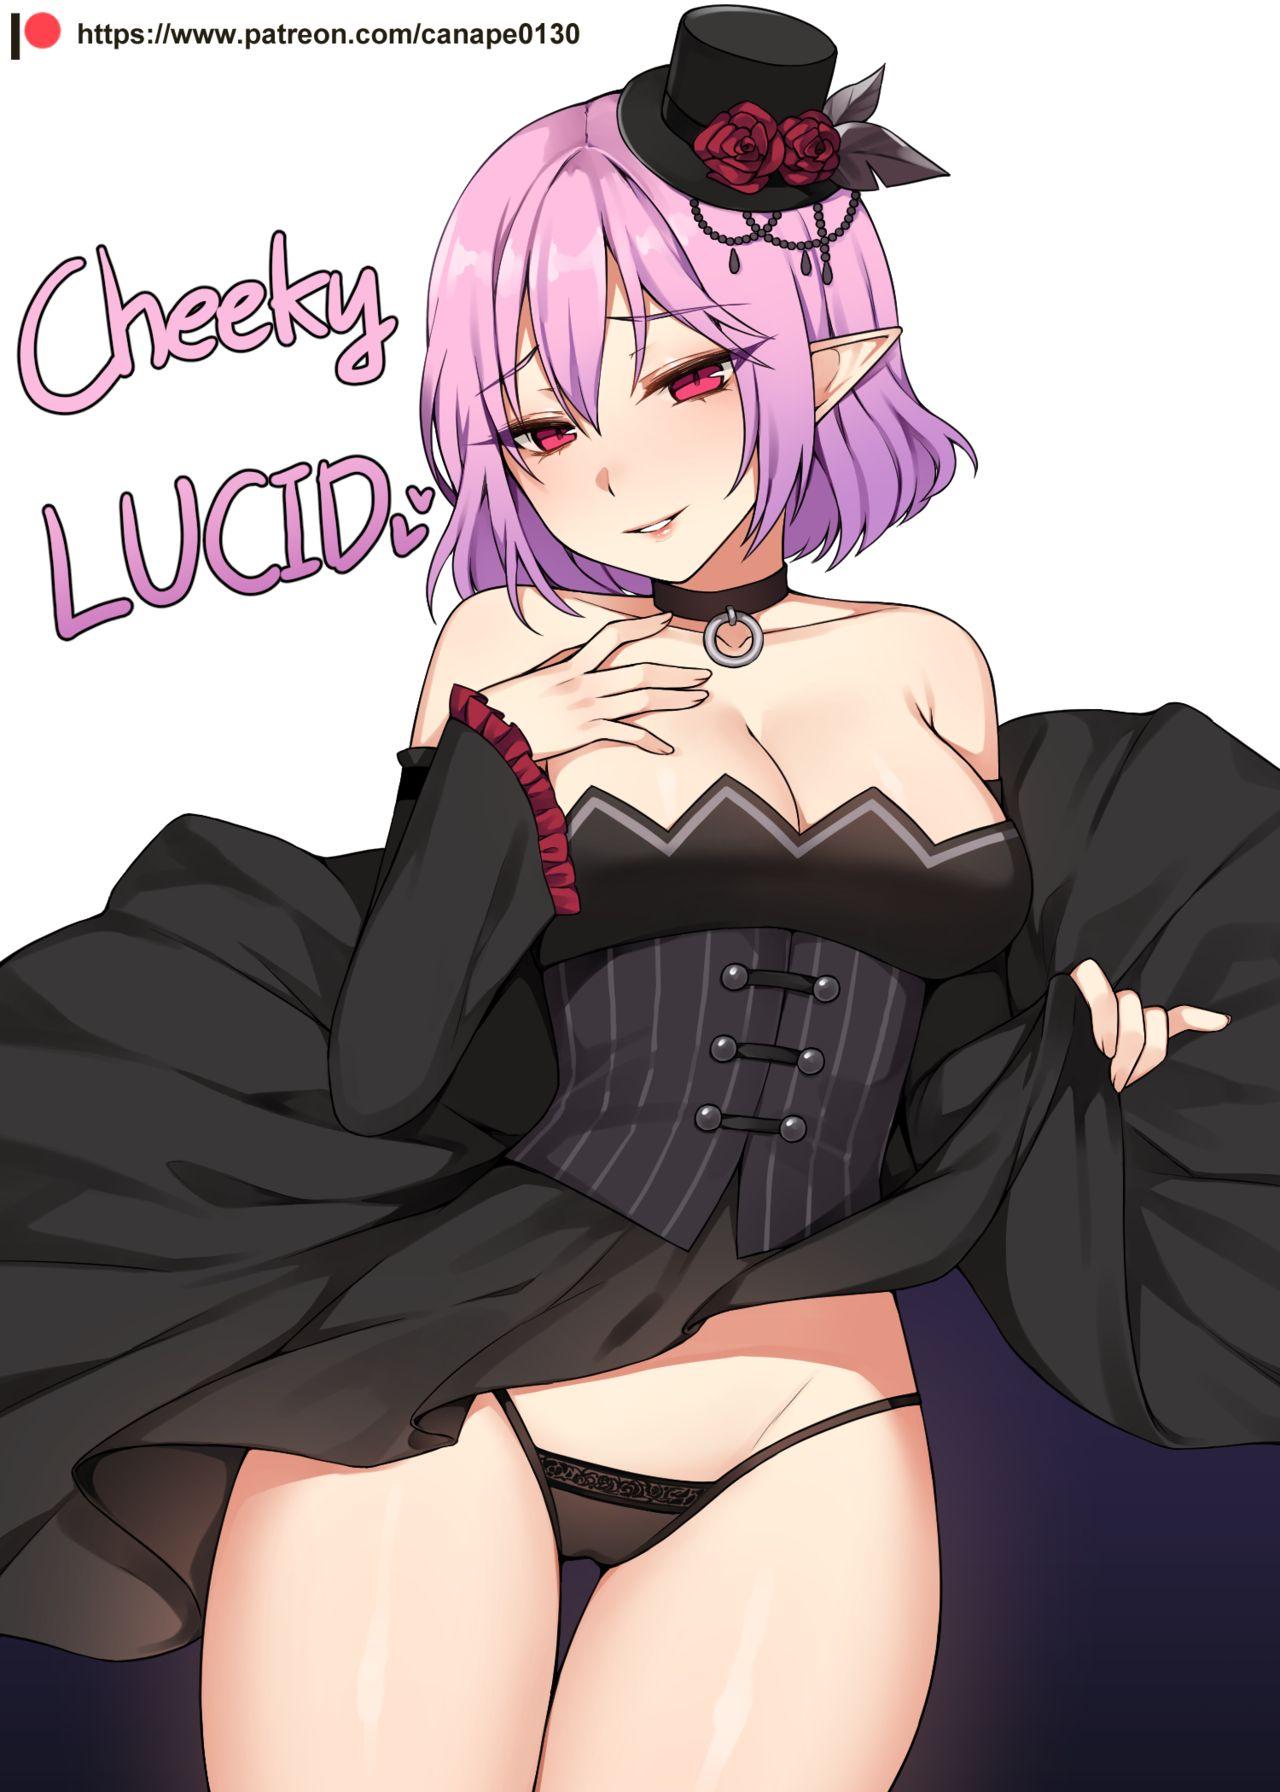 Flash Cheeky LUCID - Maplestory Travesti - Picture 1